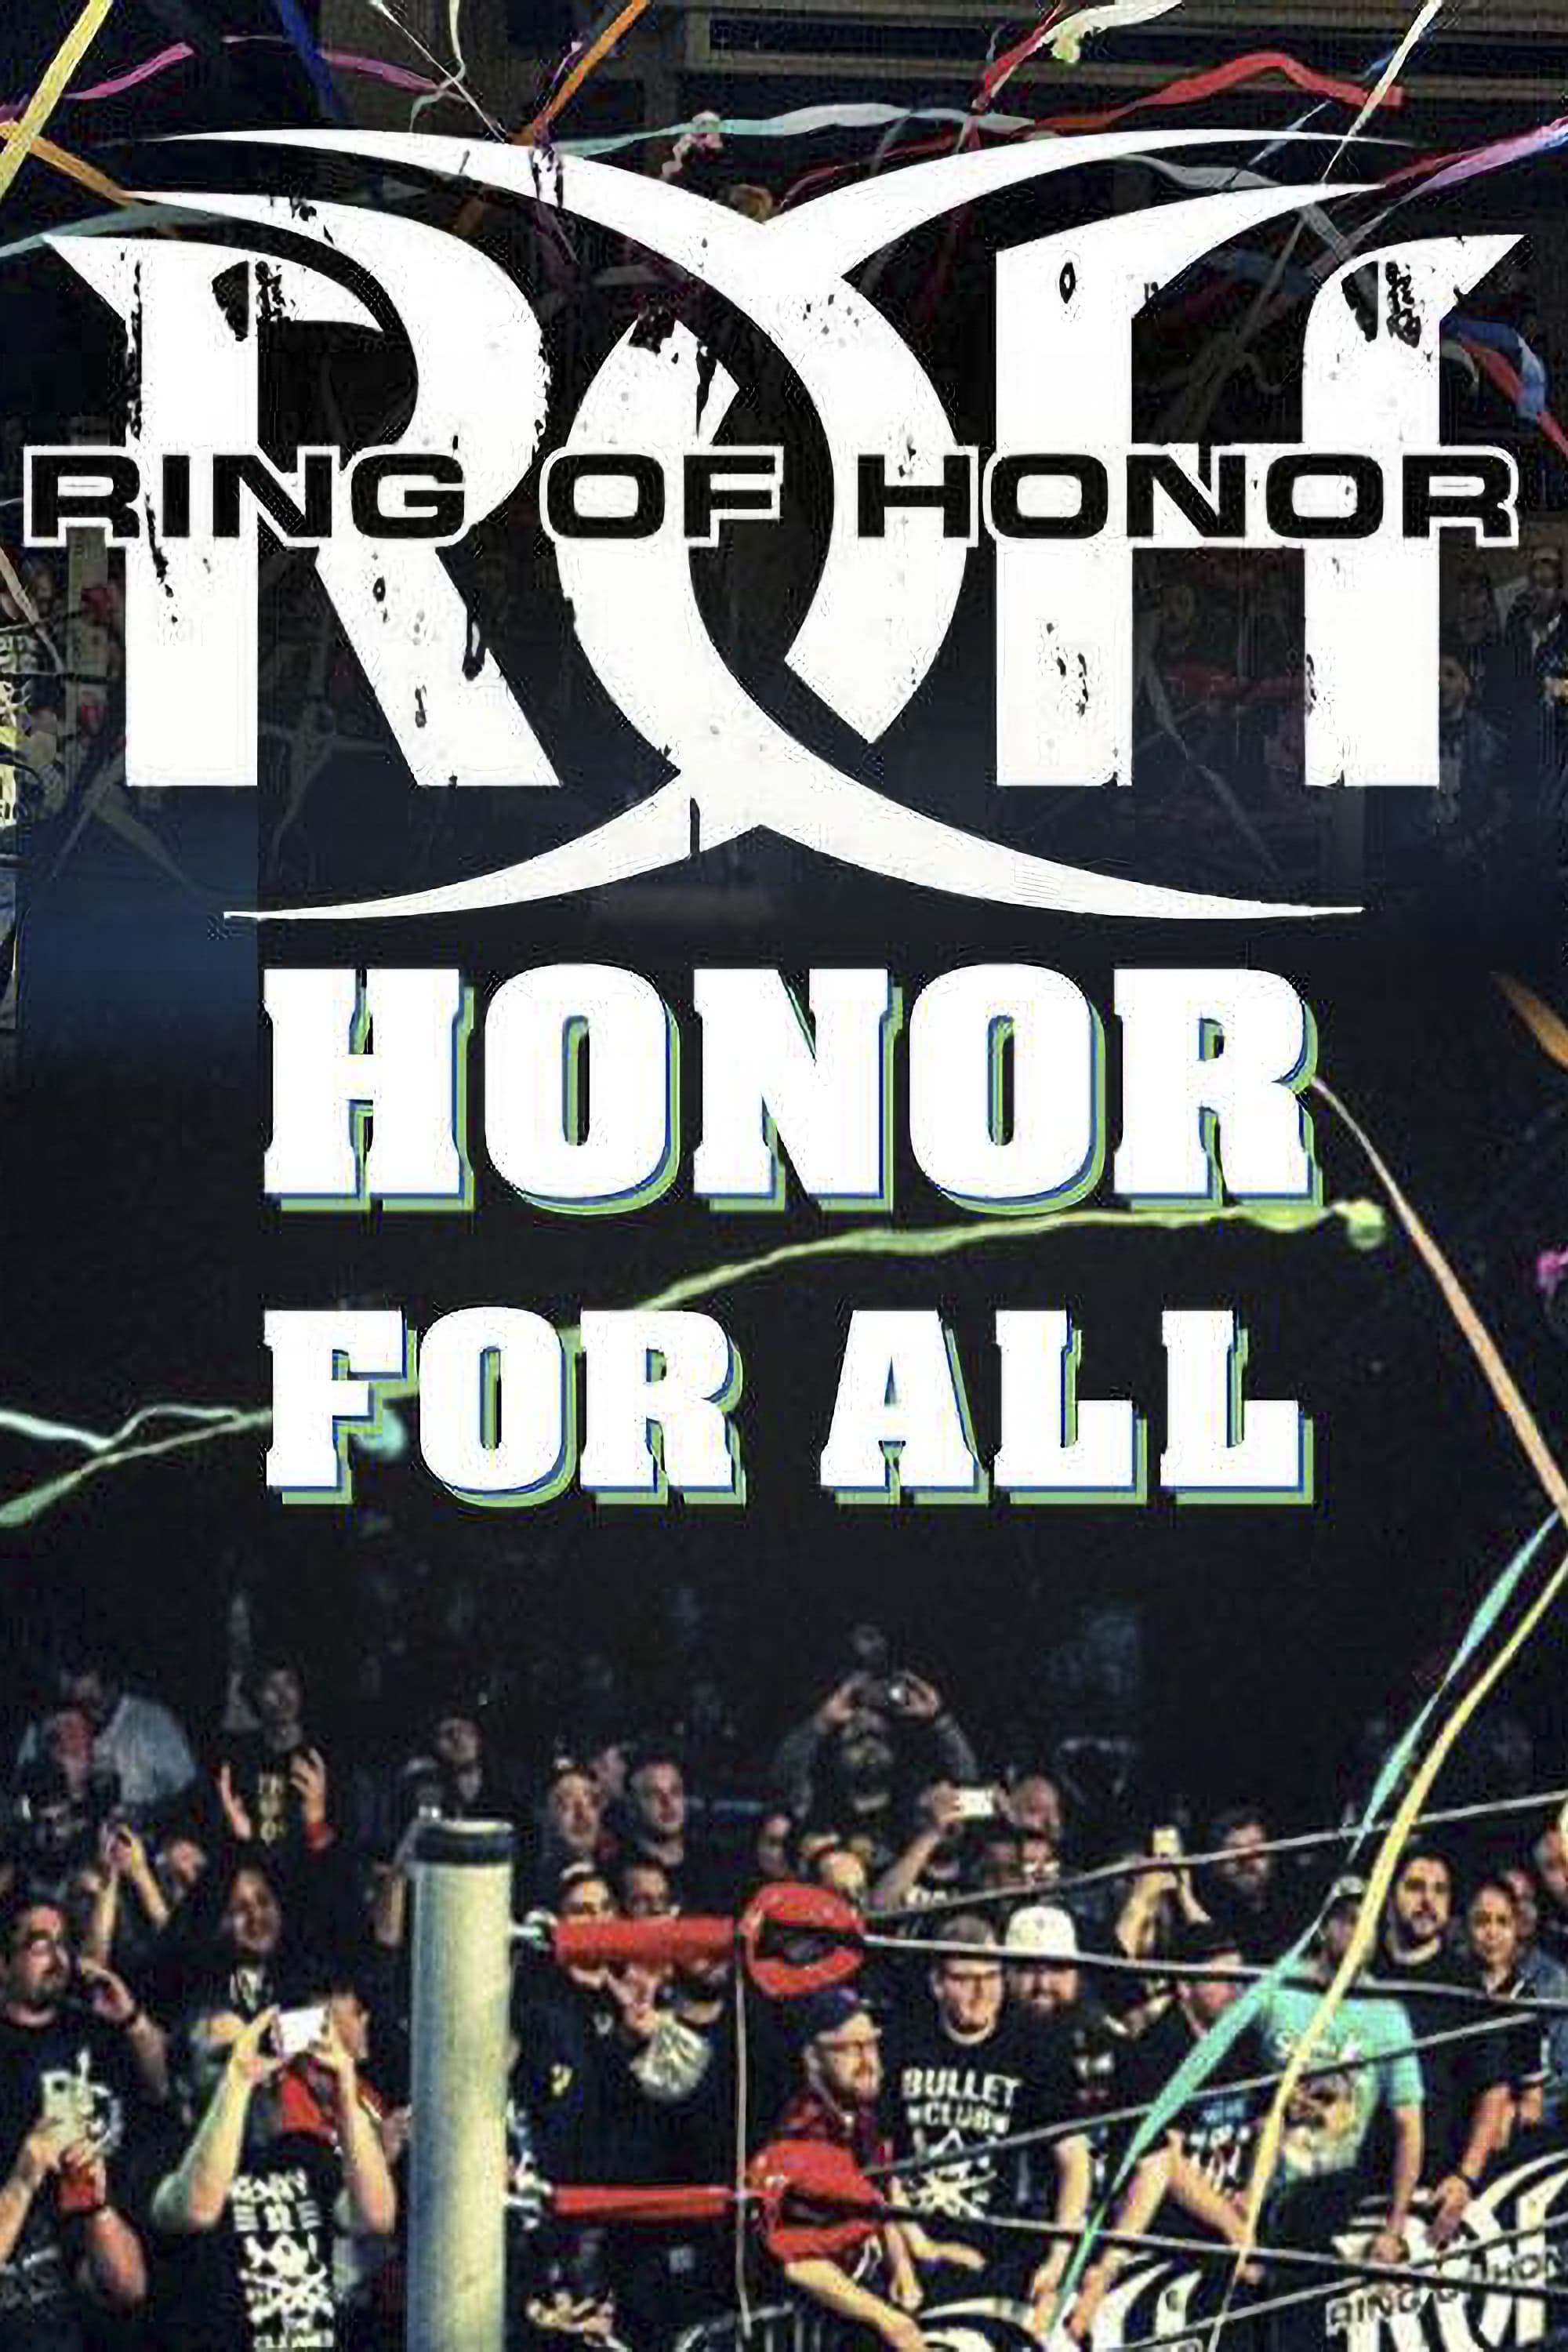 ROH: Honor For All